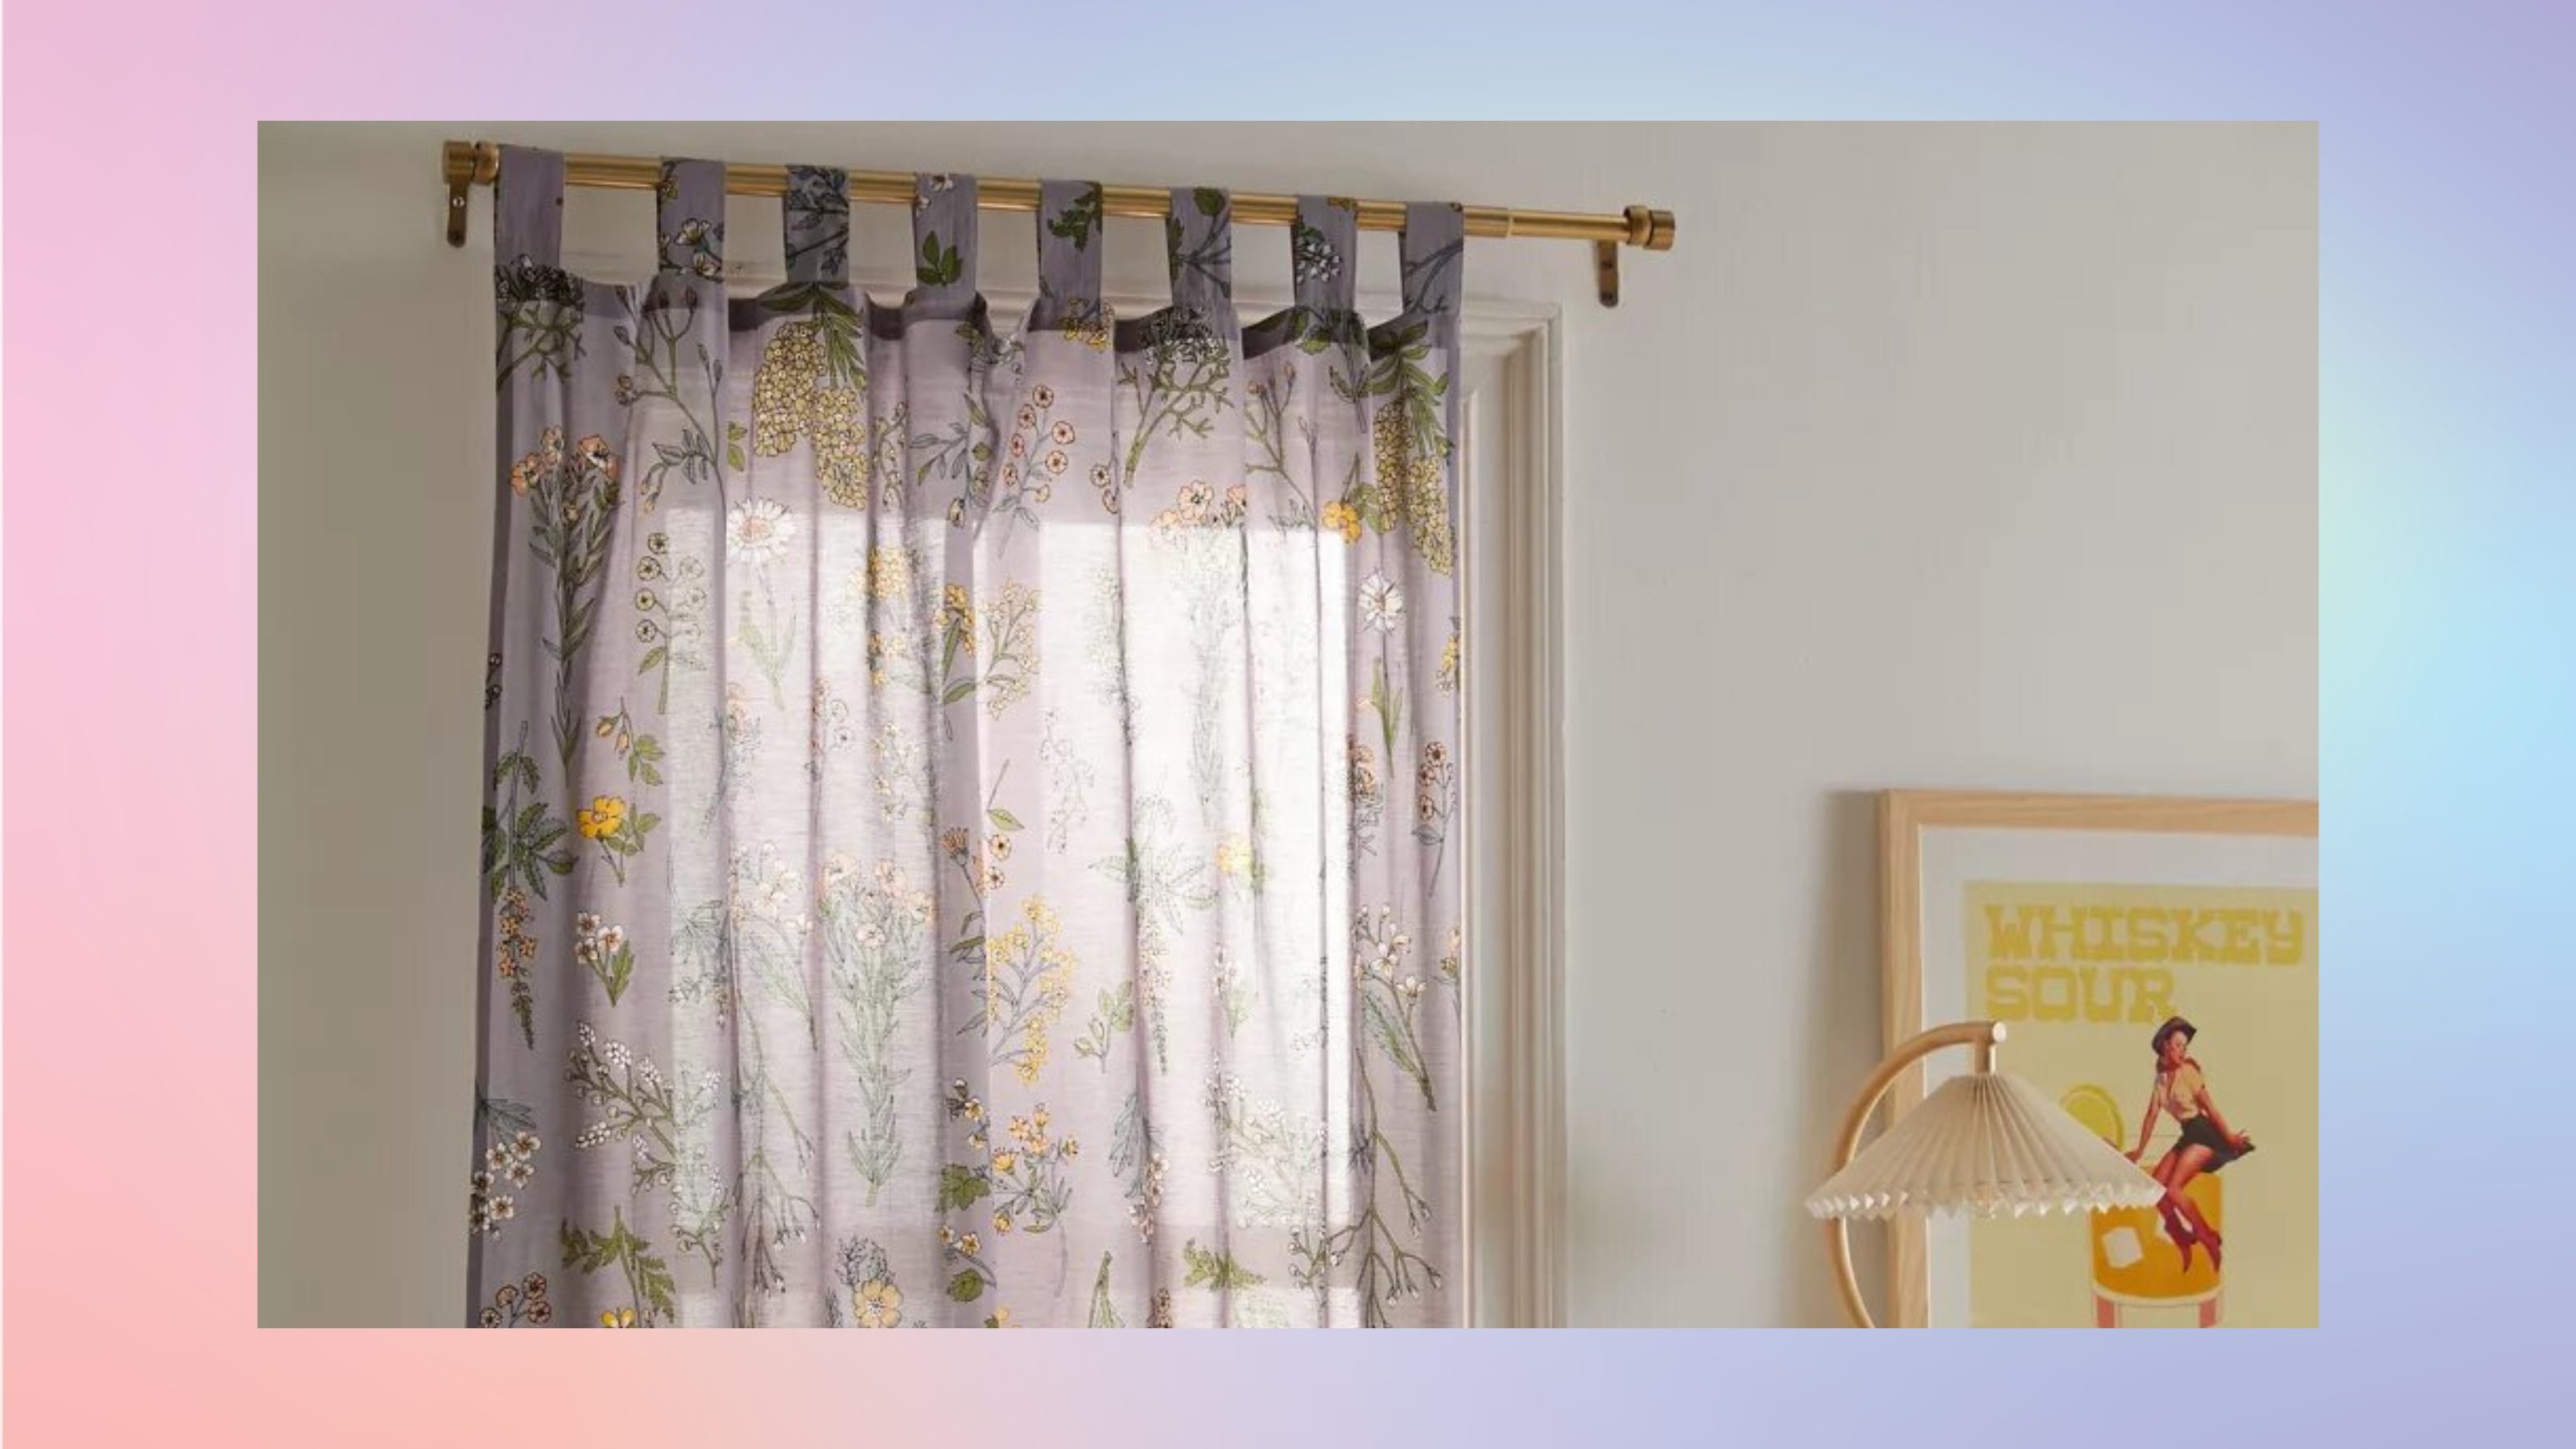 How to hang curtains in your rental like a total pro